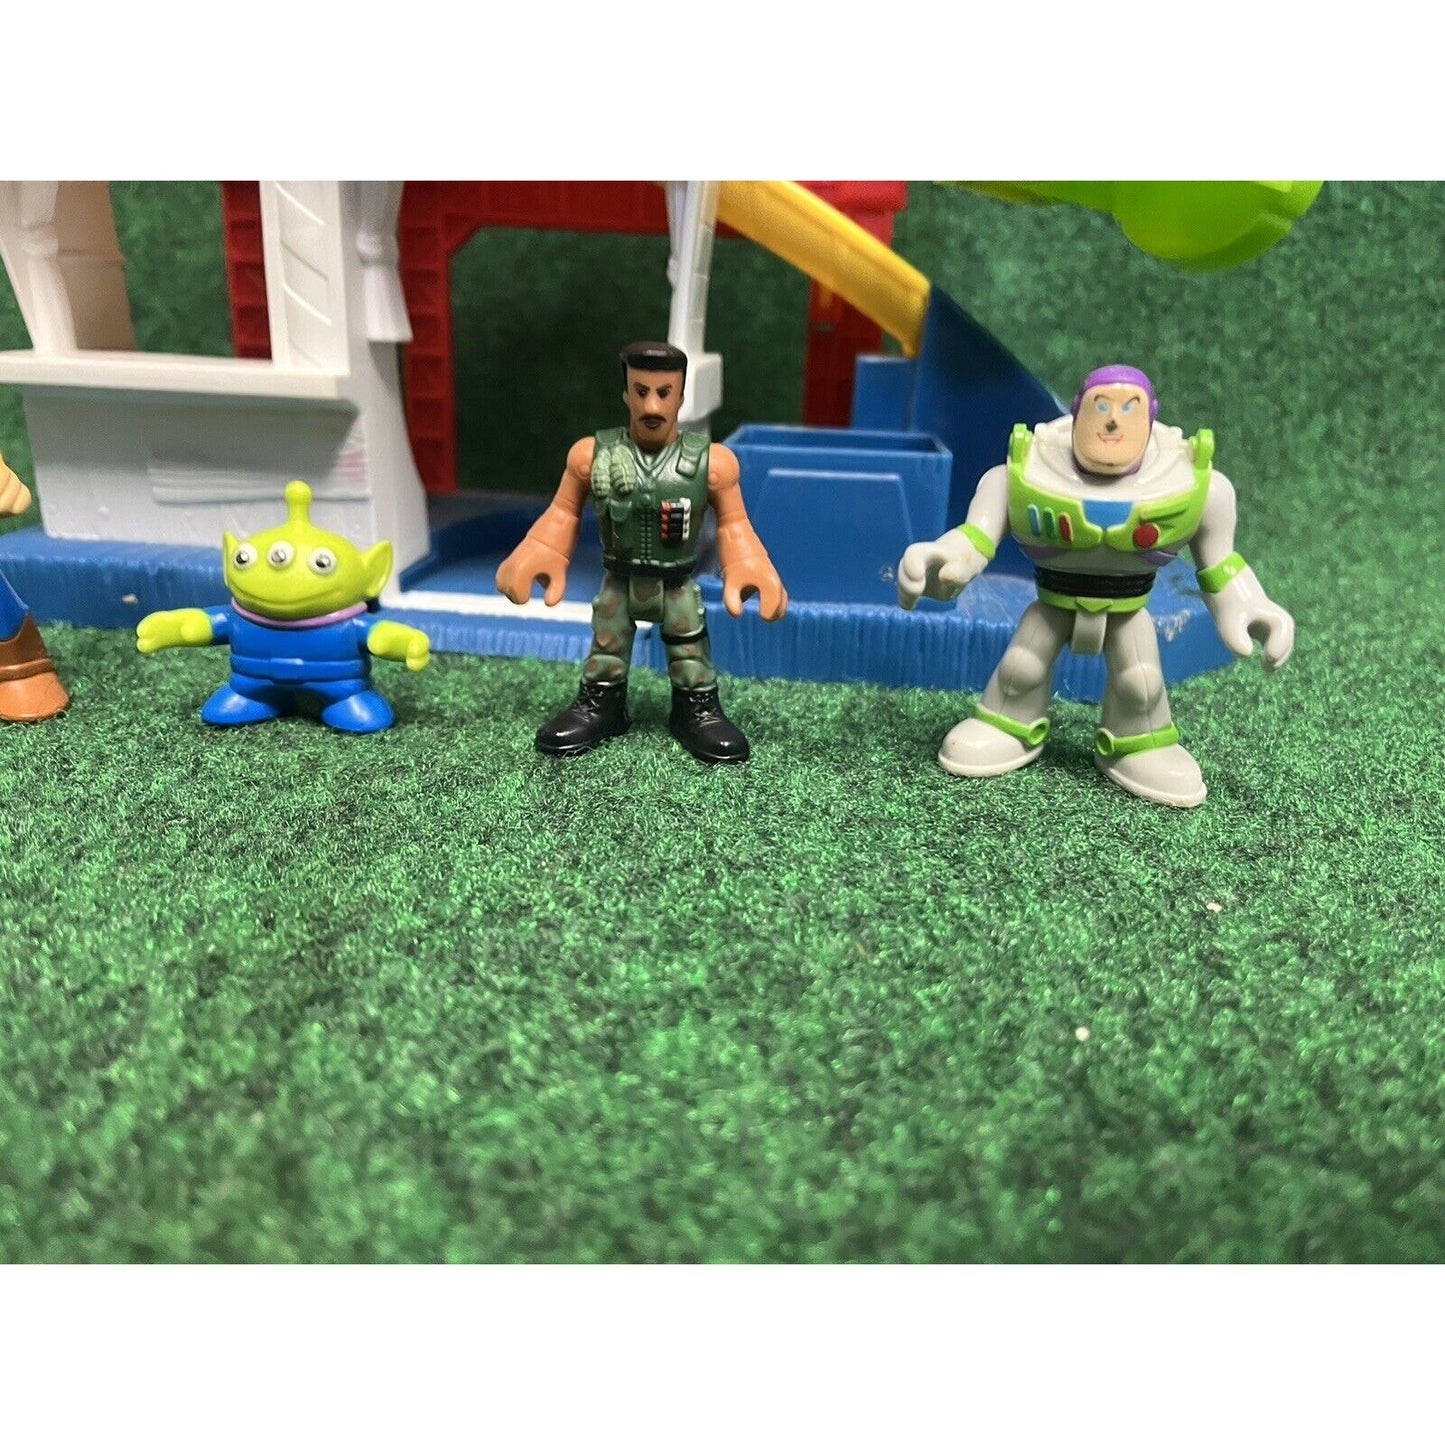 Imaginext Toy Story Play Set Carnival Disney Fisher Price w/ Buzz & Woody Figure